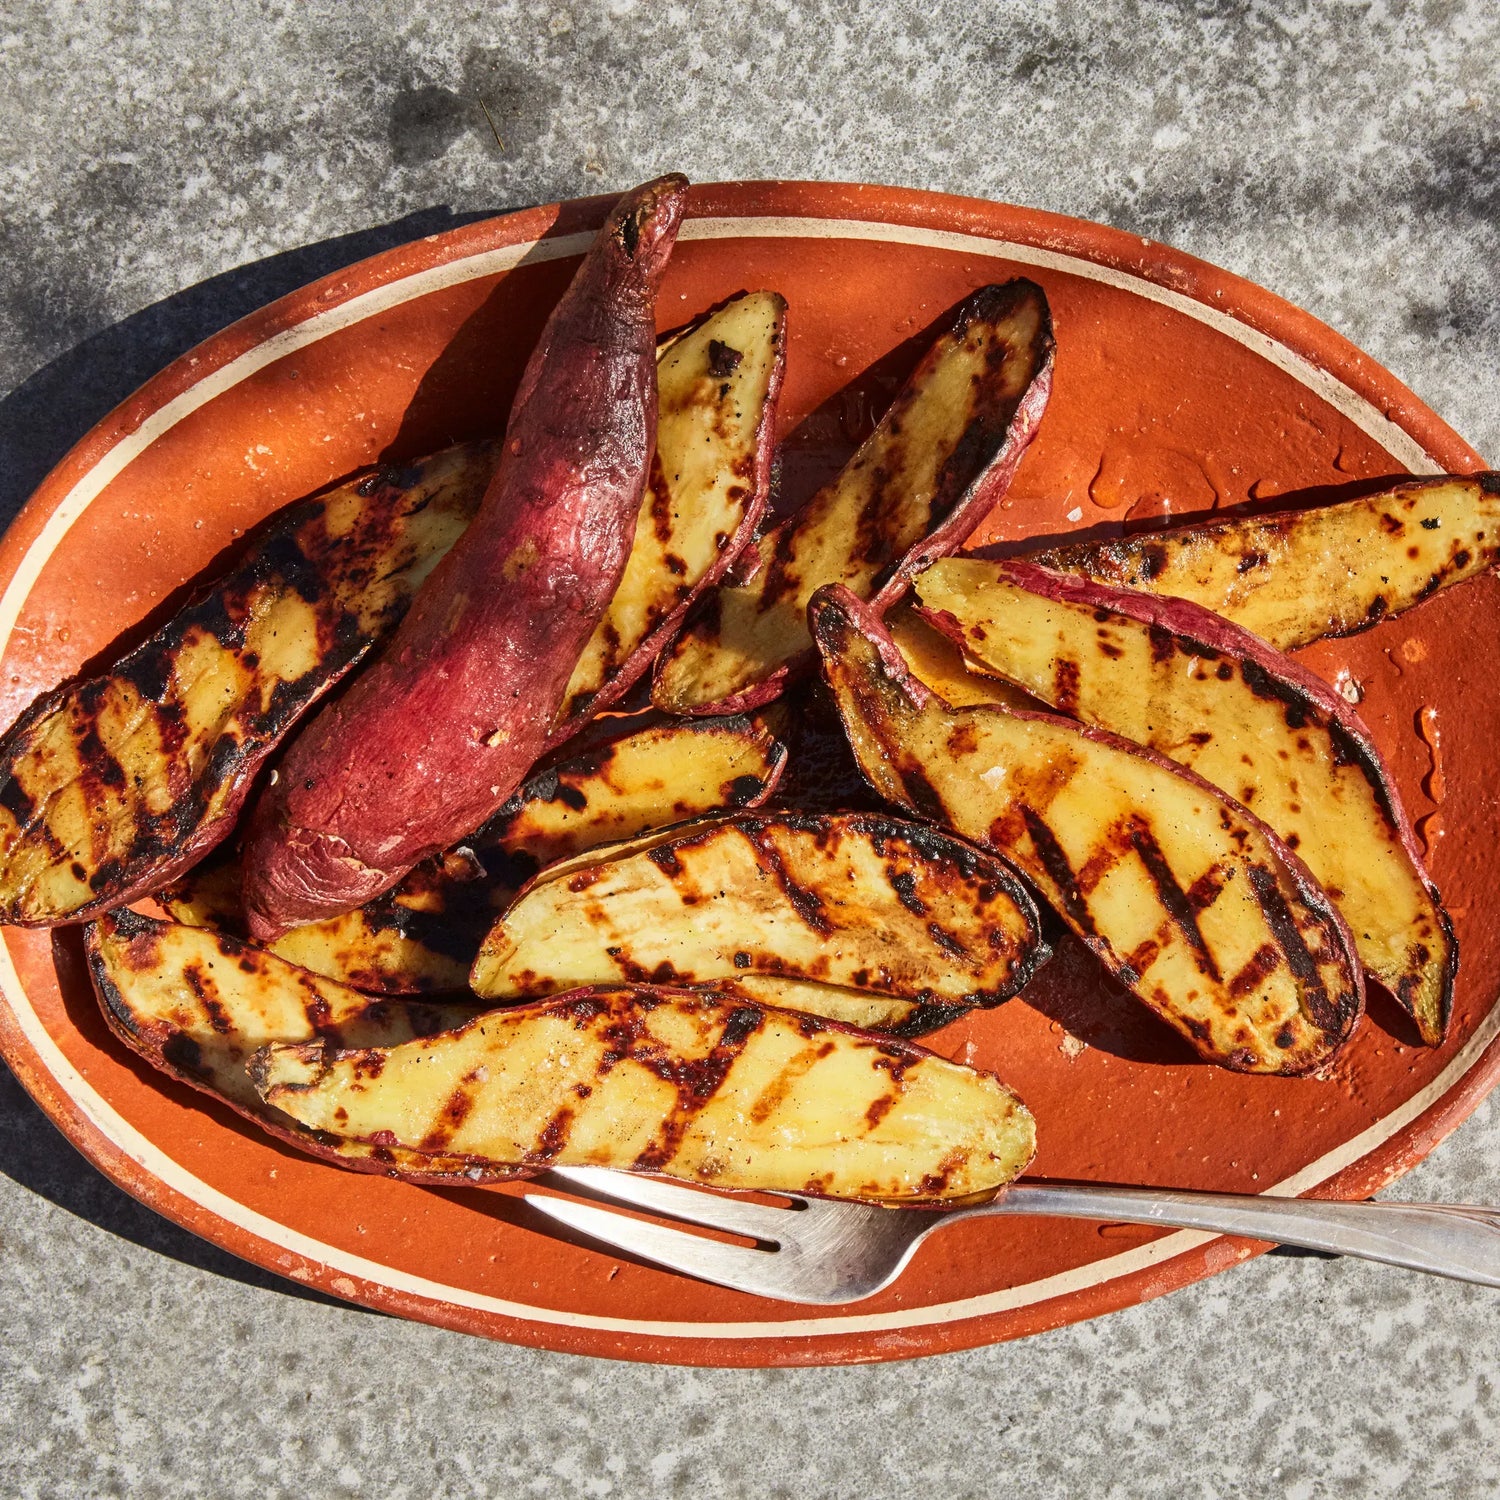 Charred Sweet Potatoes With Honey and Olive Oil